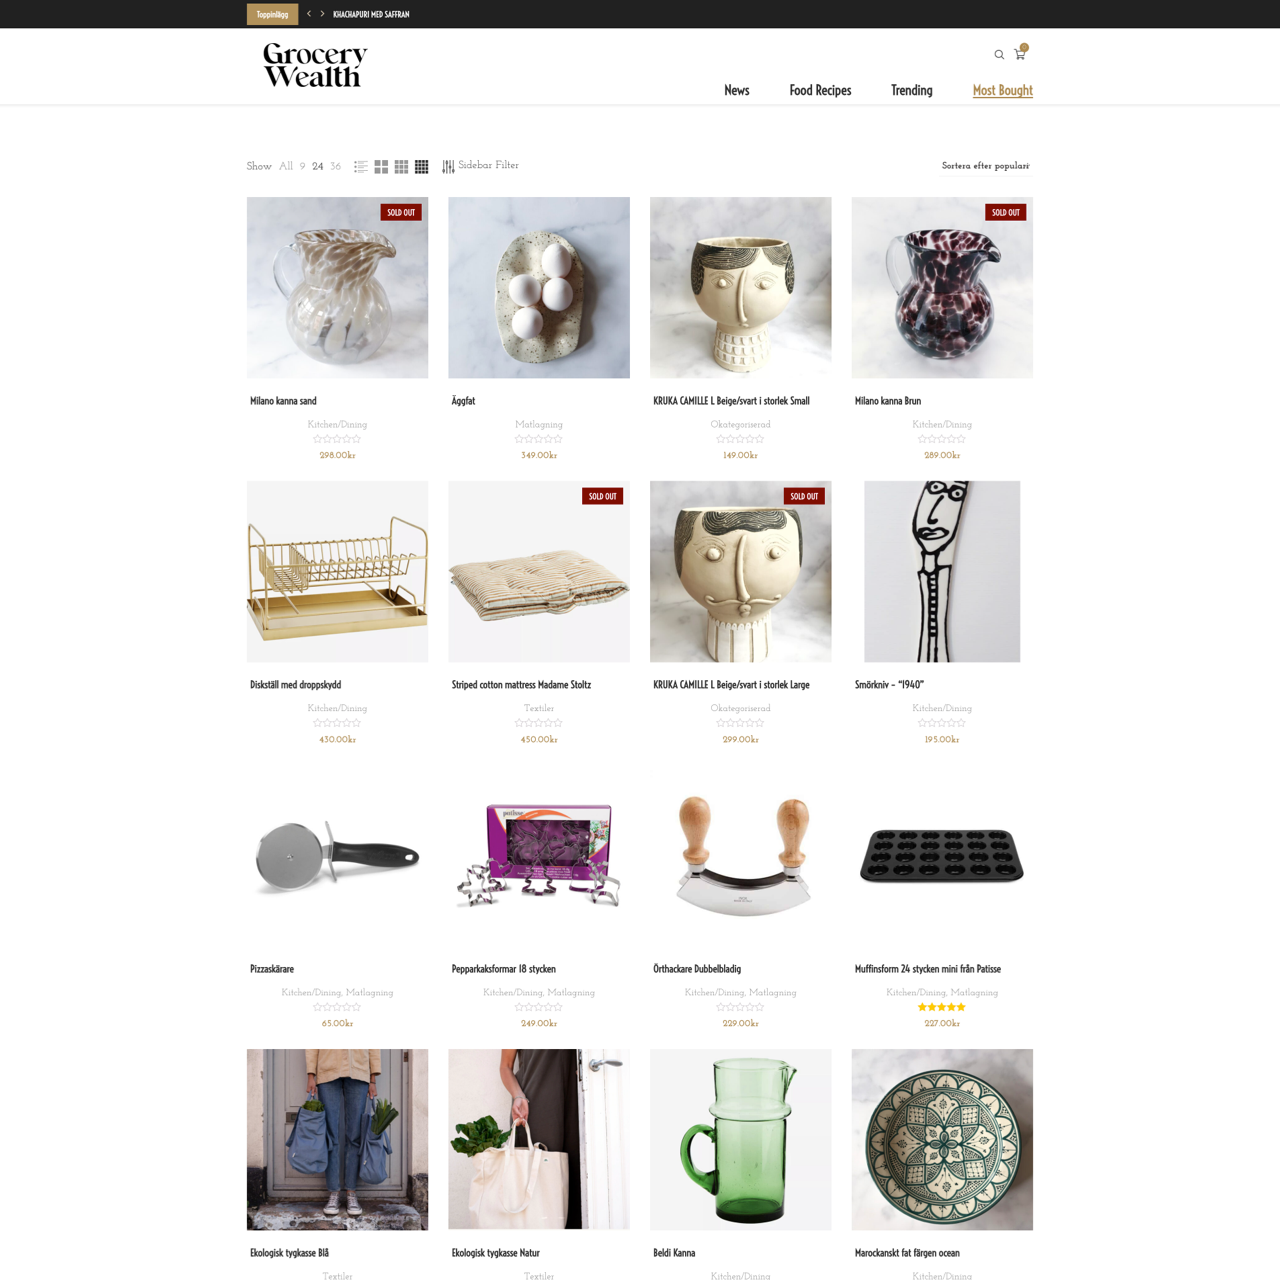 Neyio by Norrhavet – Grocery Wealth ecommerce wordpress 4 Copy